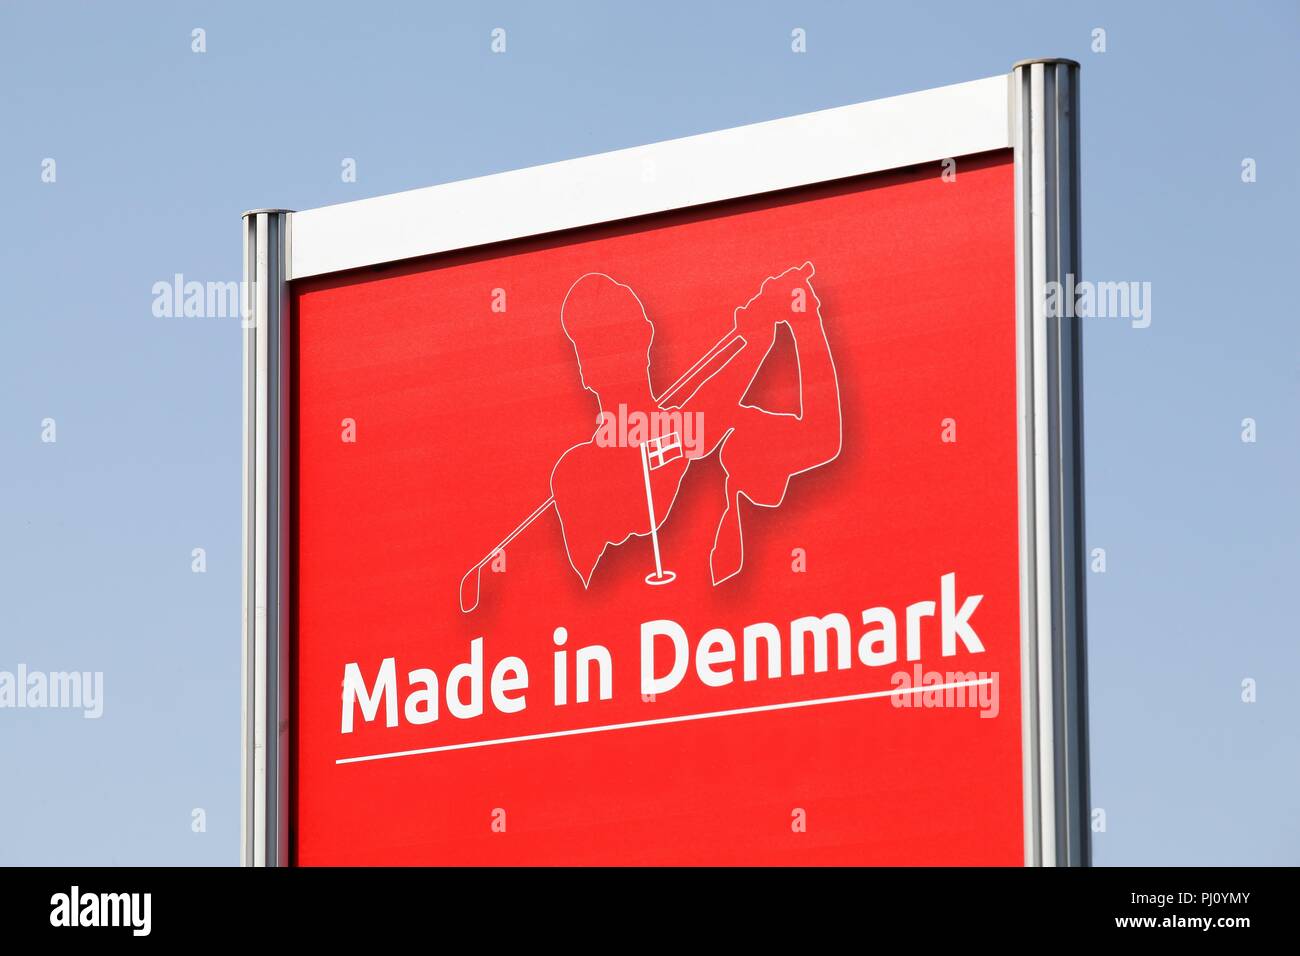 Himmerland, Denmark - August 23, 2017: Made in Denmark sign on a panel. Made in Denmark is a European Tour golf tournament played annually in Denmark Stock Photo